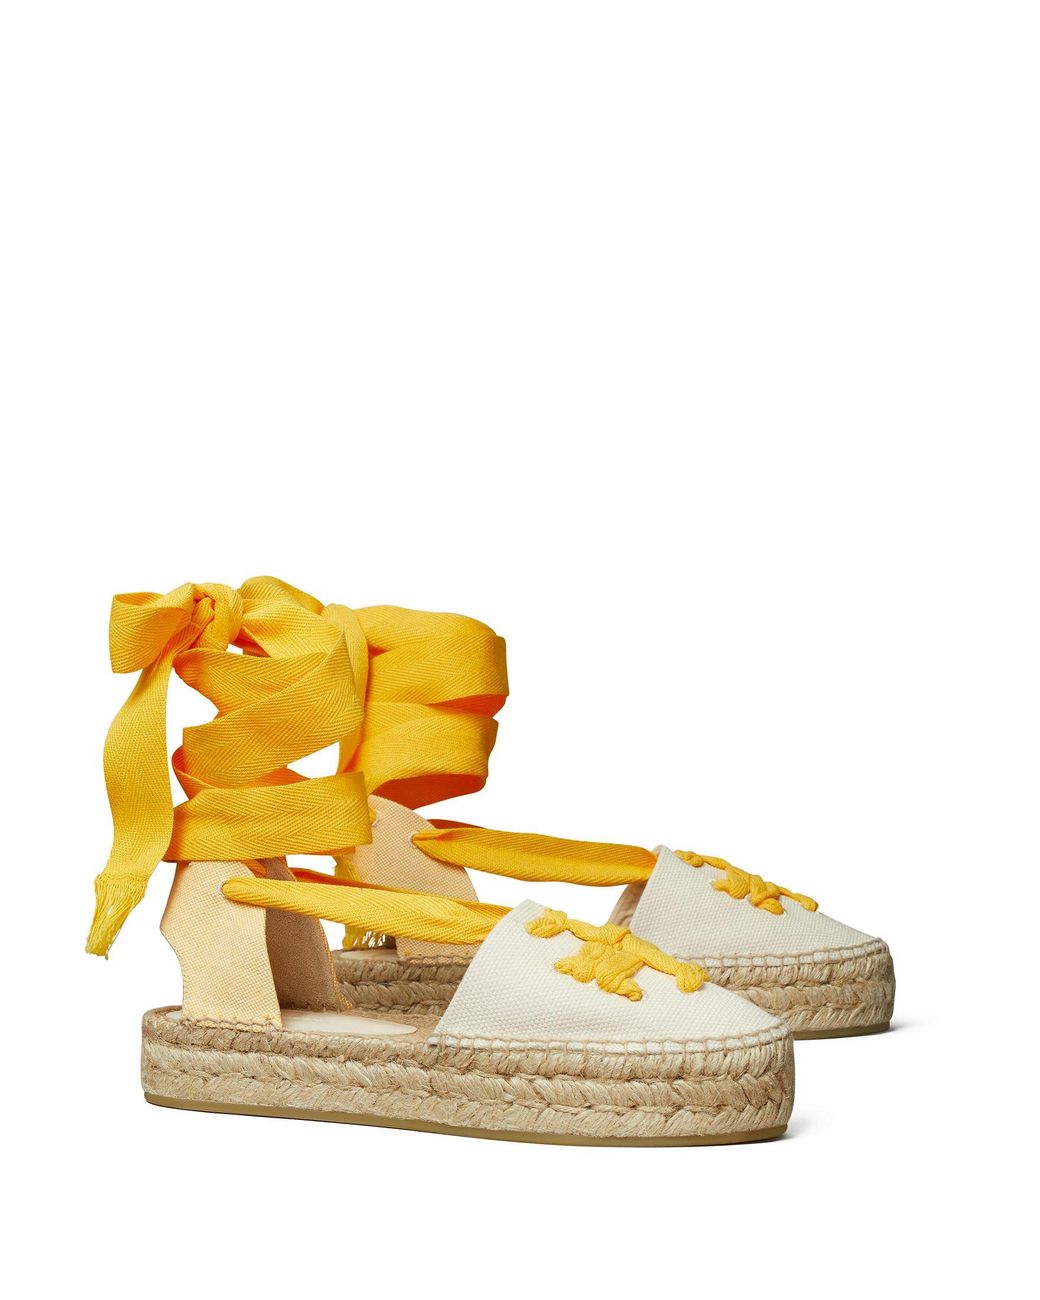 Tory Burch Woven Double T Espadrille in Yellow | Lyst